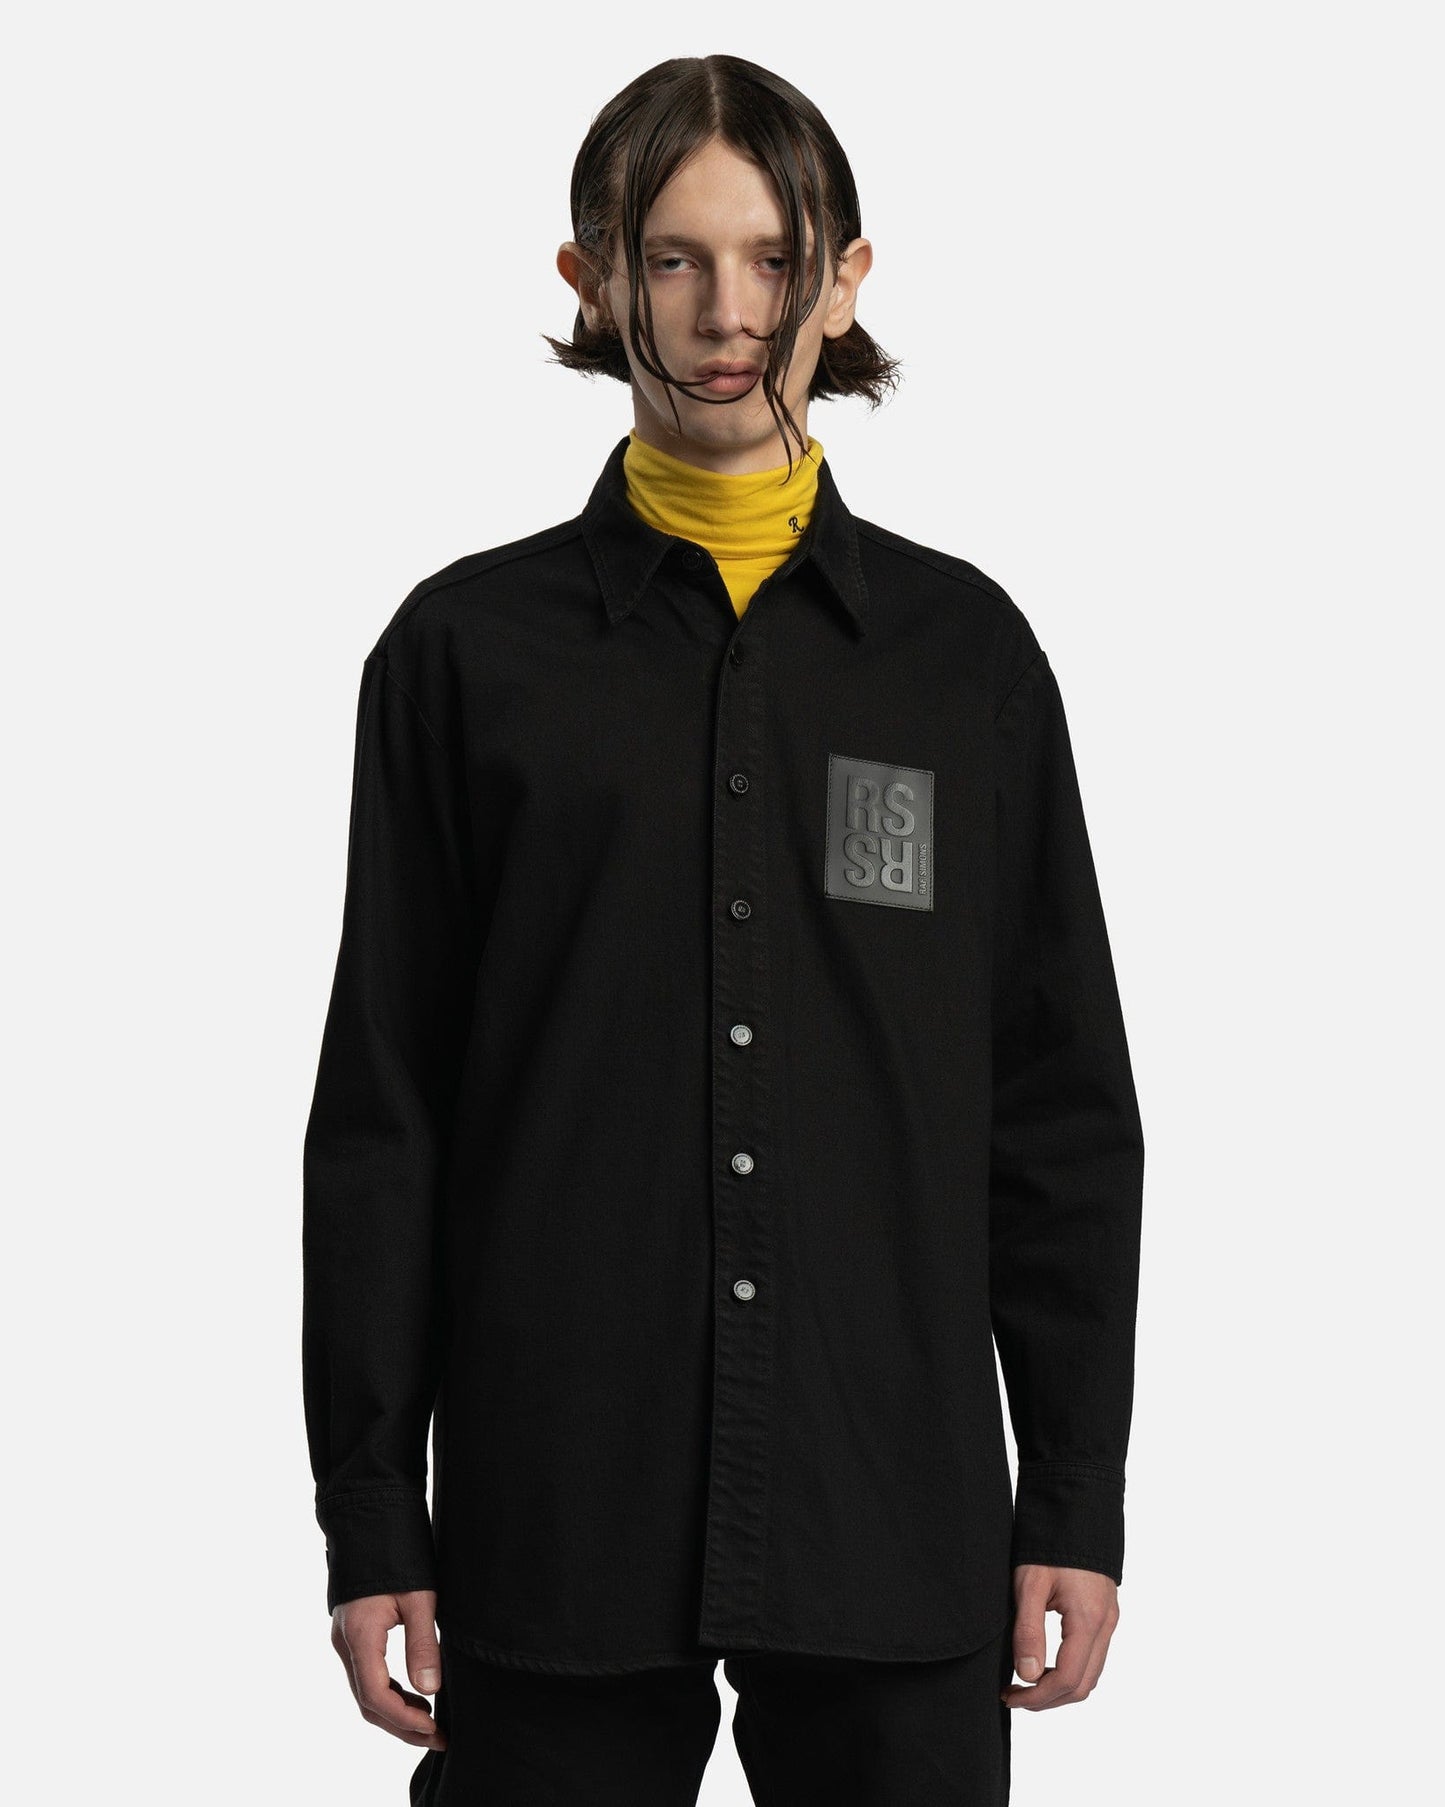 Raf Simons Men's Shirts Leather Patch Straight Fit Denim Shirt in Black